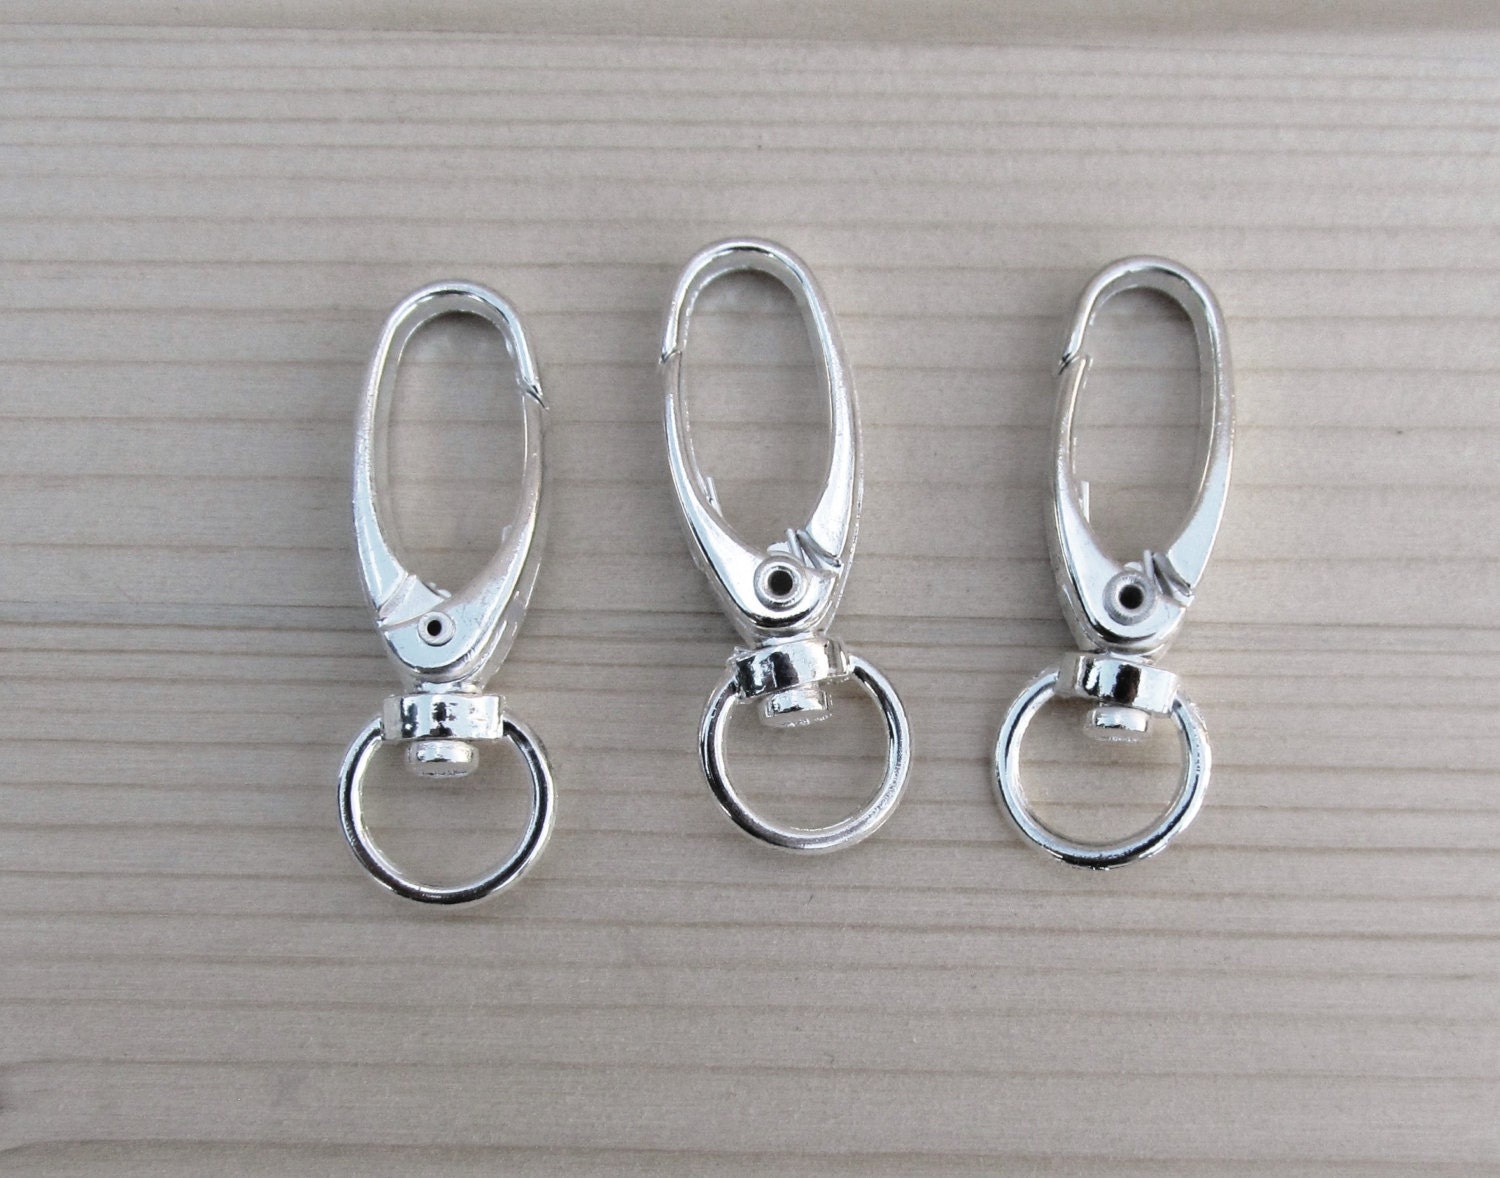 LARGE 20 Pcs. Silver Plated Lobster Swivel Clasps for Key - Etsy